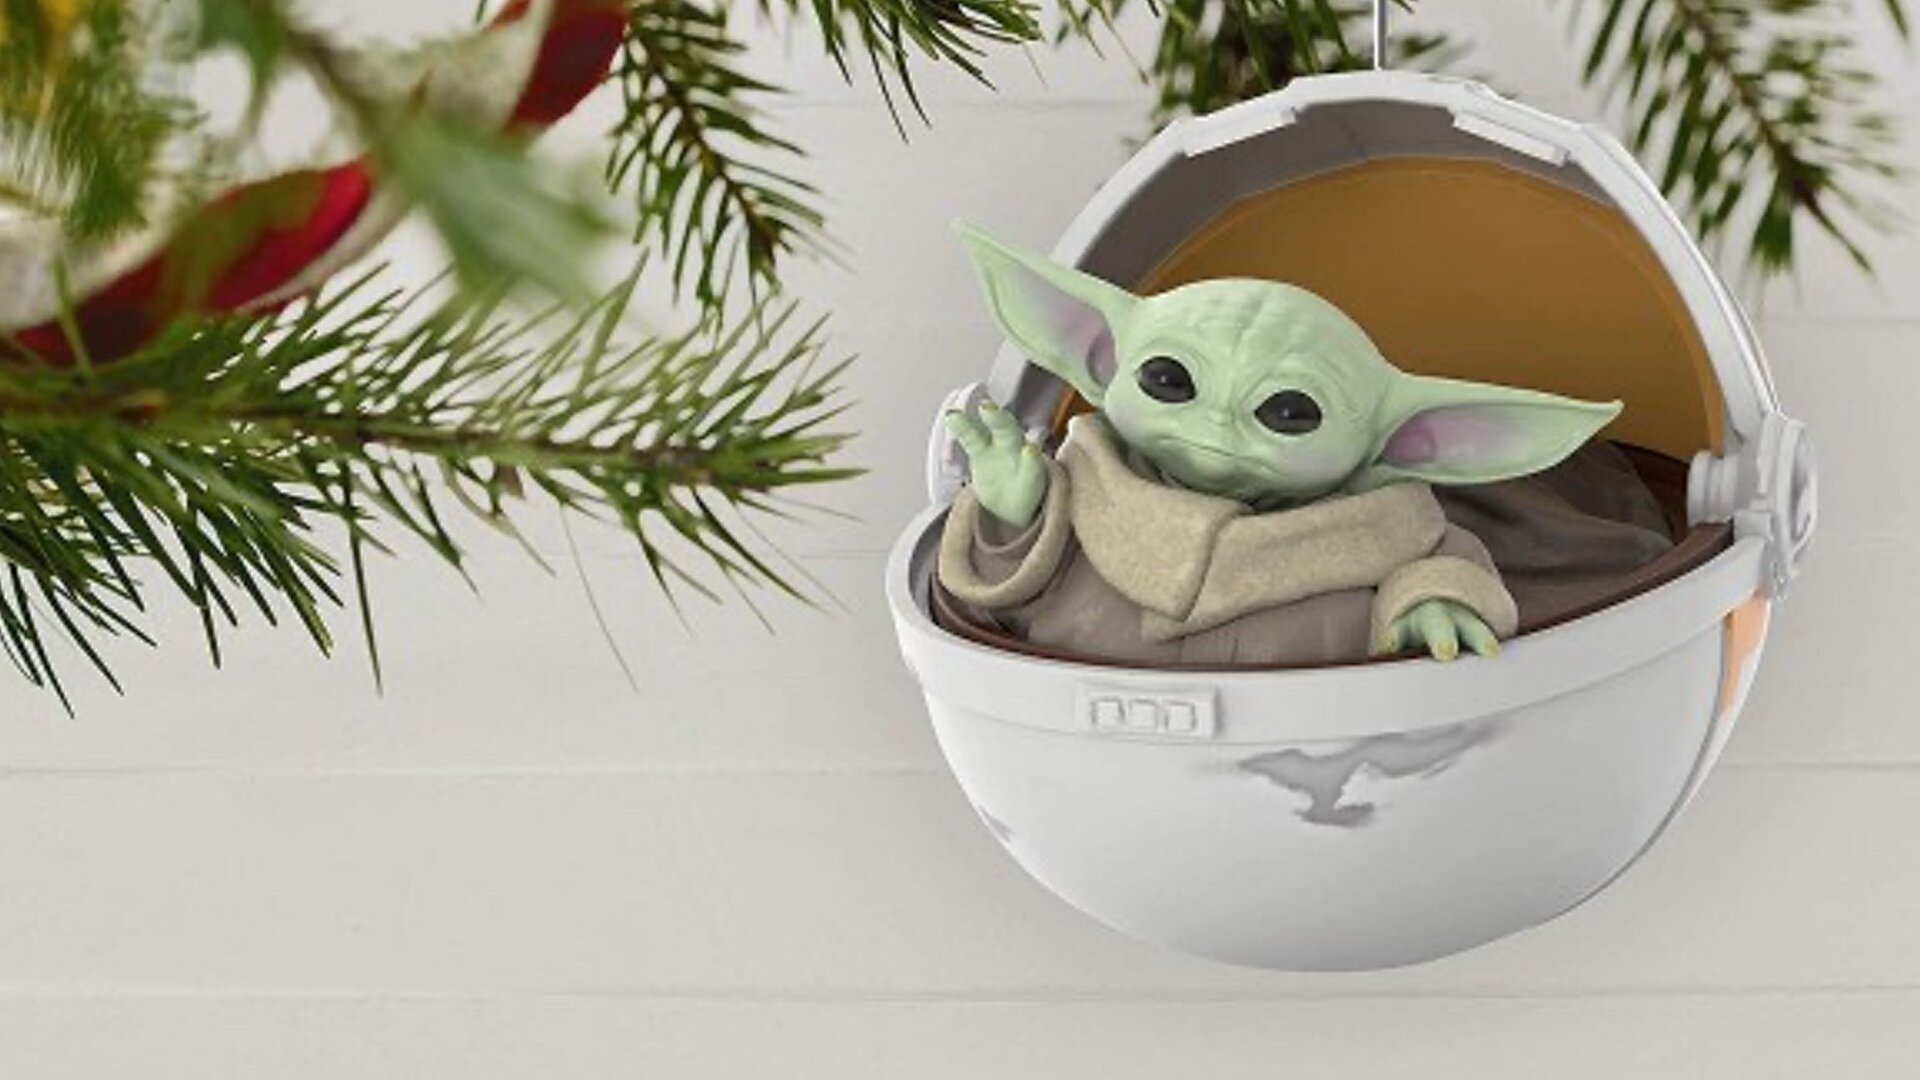 This is THE MANDALORIAN Baby Yoda Ornament That You've Been Looking For